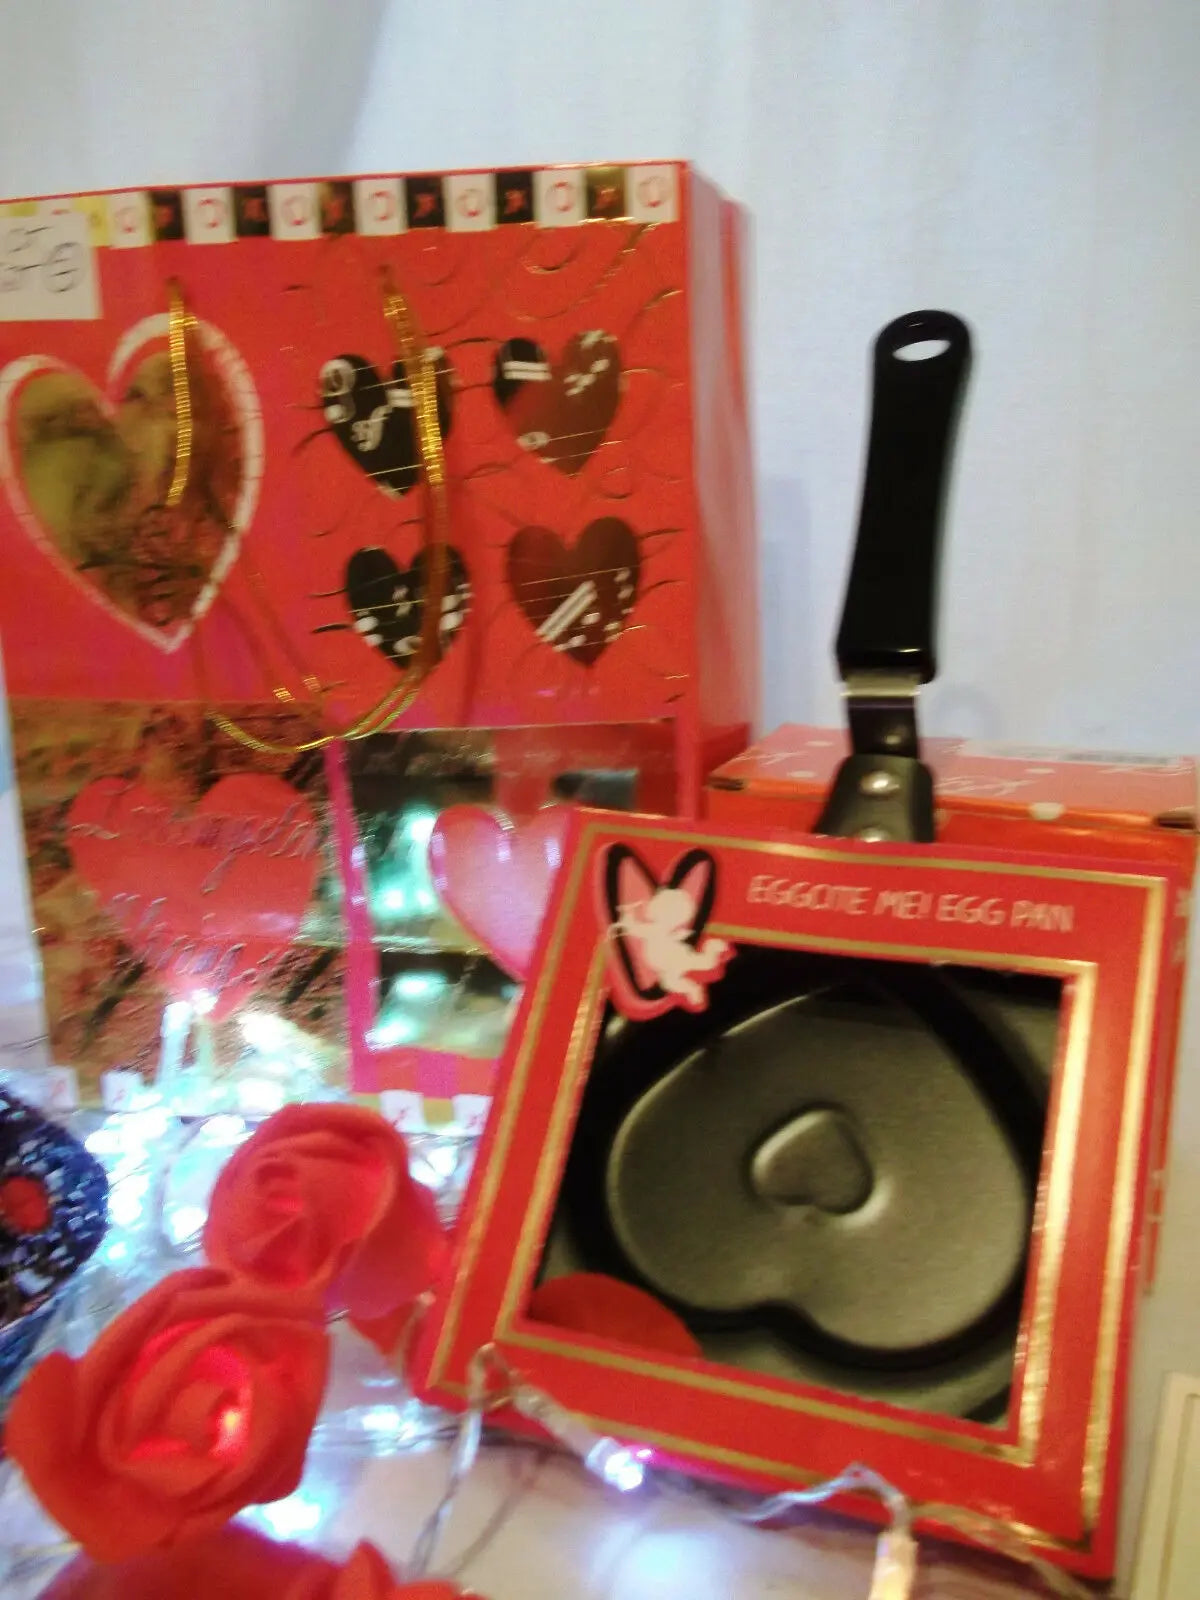 valentines day/mothers day "LOVE" GIFT SET 7 - pamper the love of your life WonkeyDonkeyBazaar